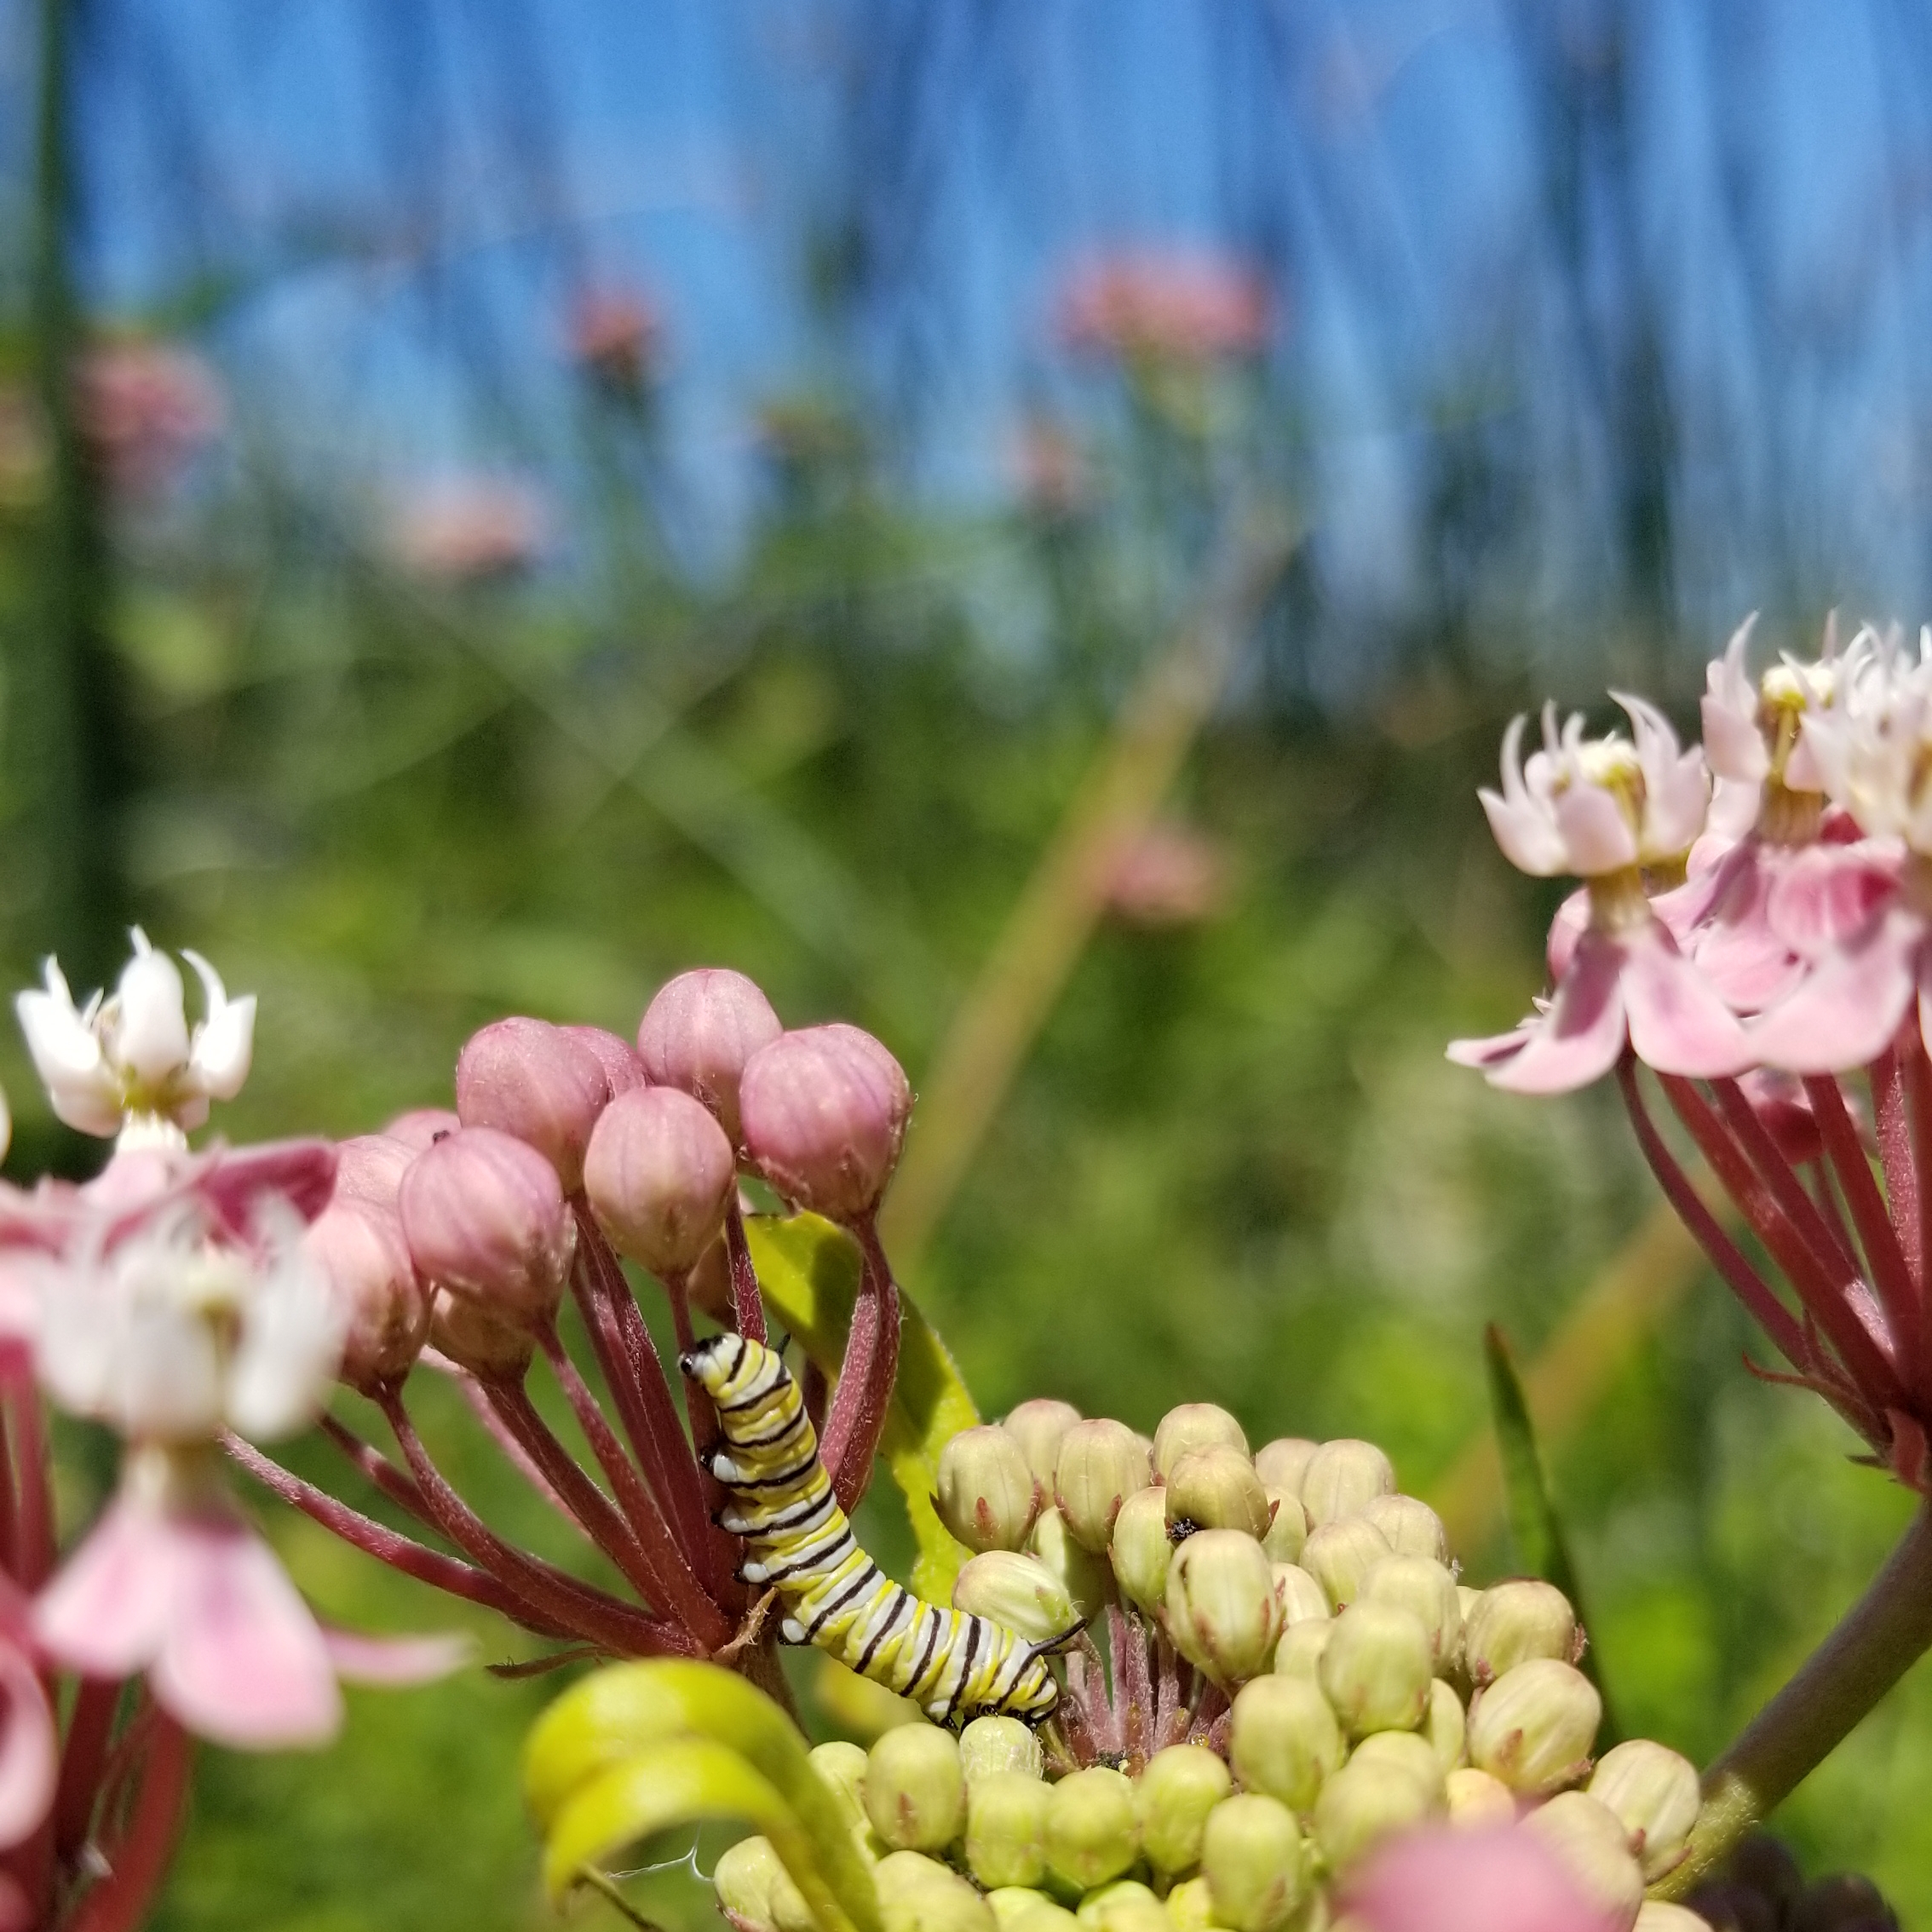 A tiny yellow, white, and black striped monarch caterpillar on the pink flowers of swamp milkweed.